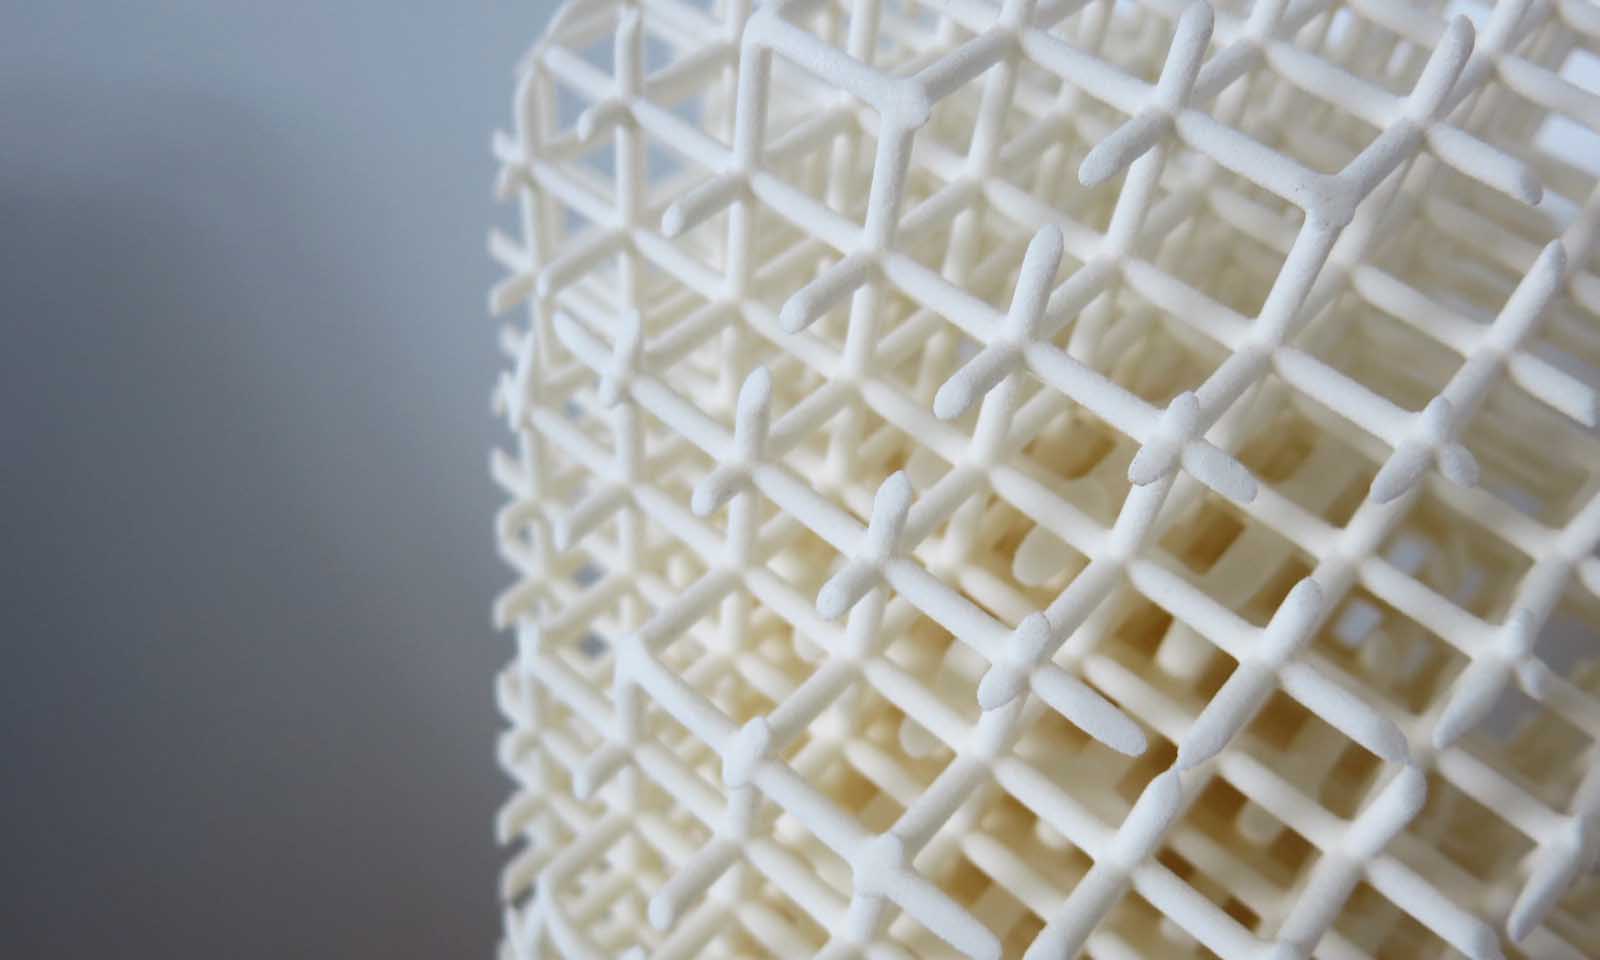 Optimize your 3D Printed Parts with Lattice Structures